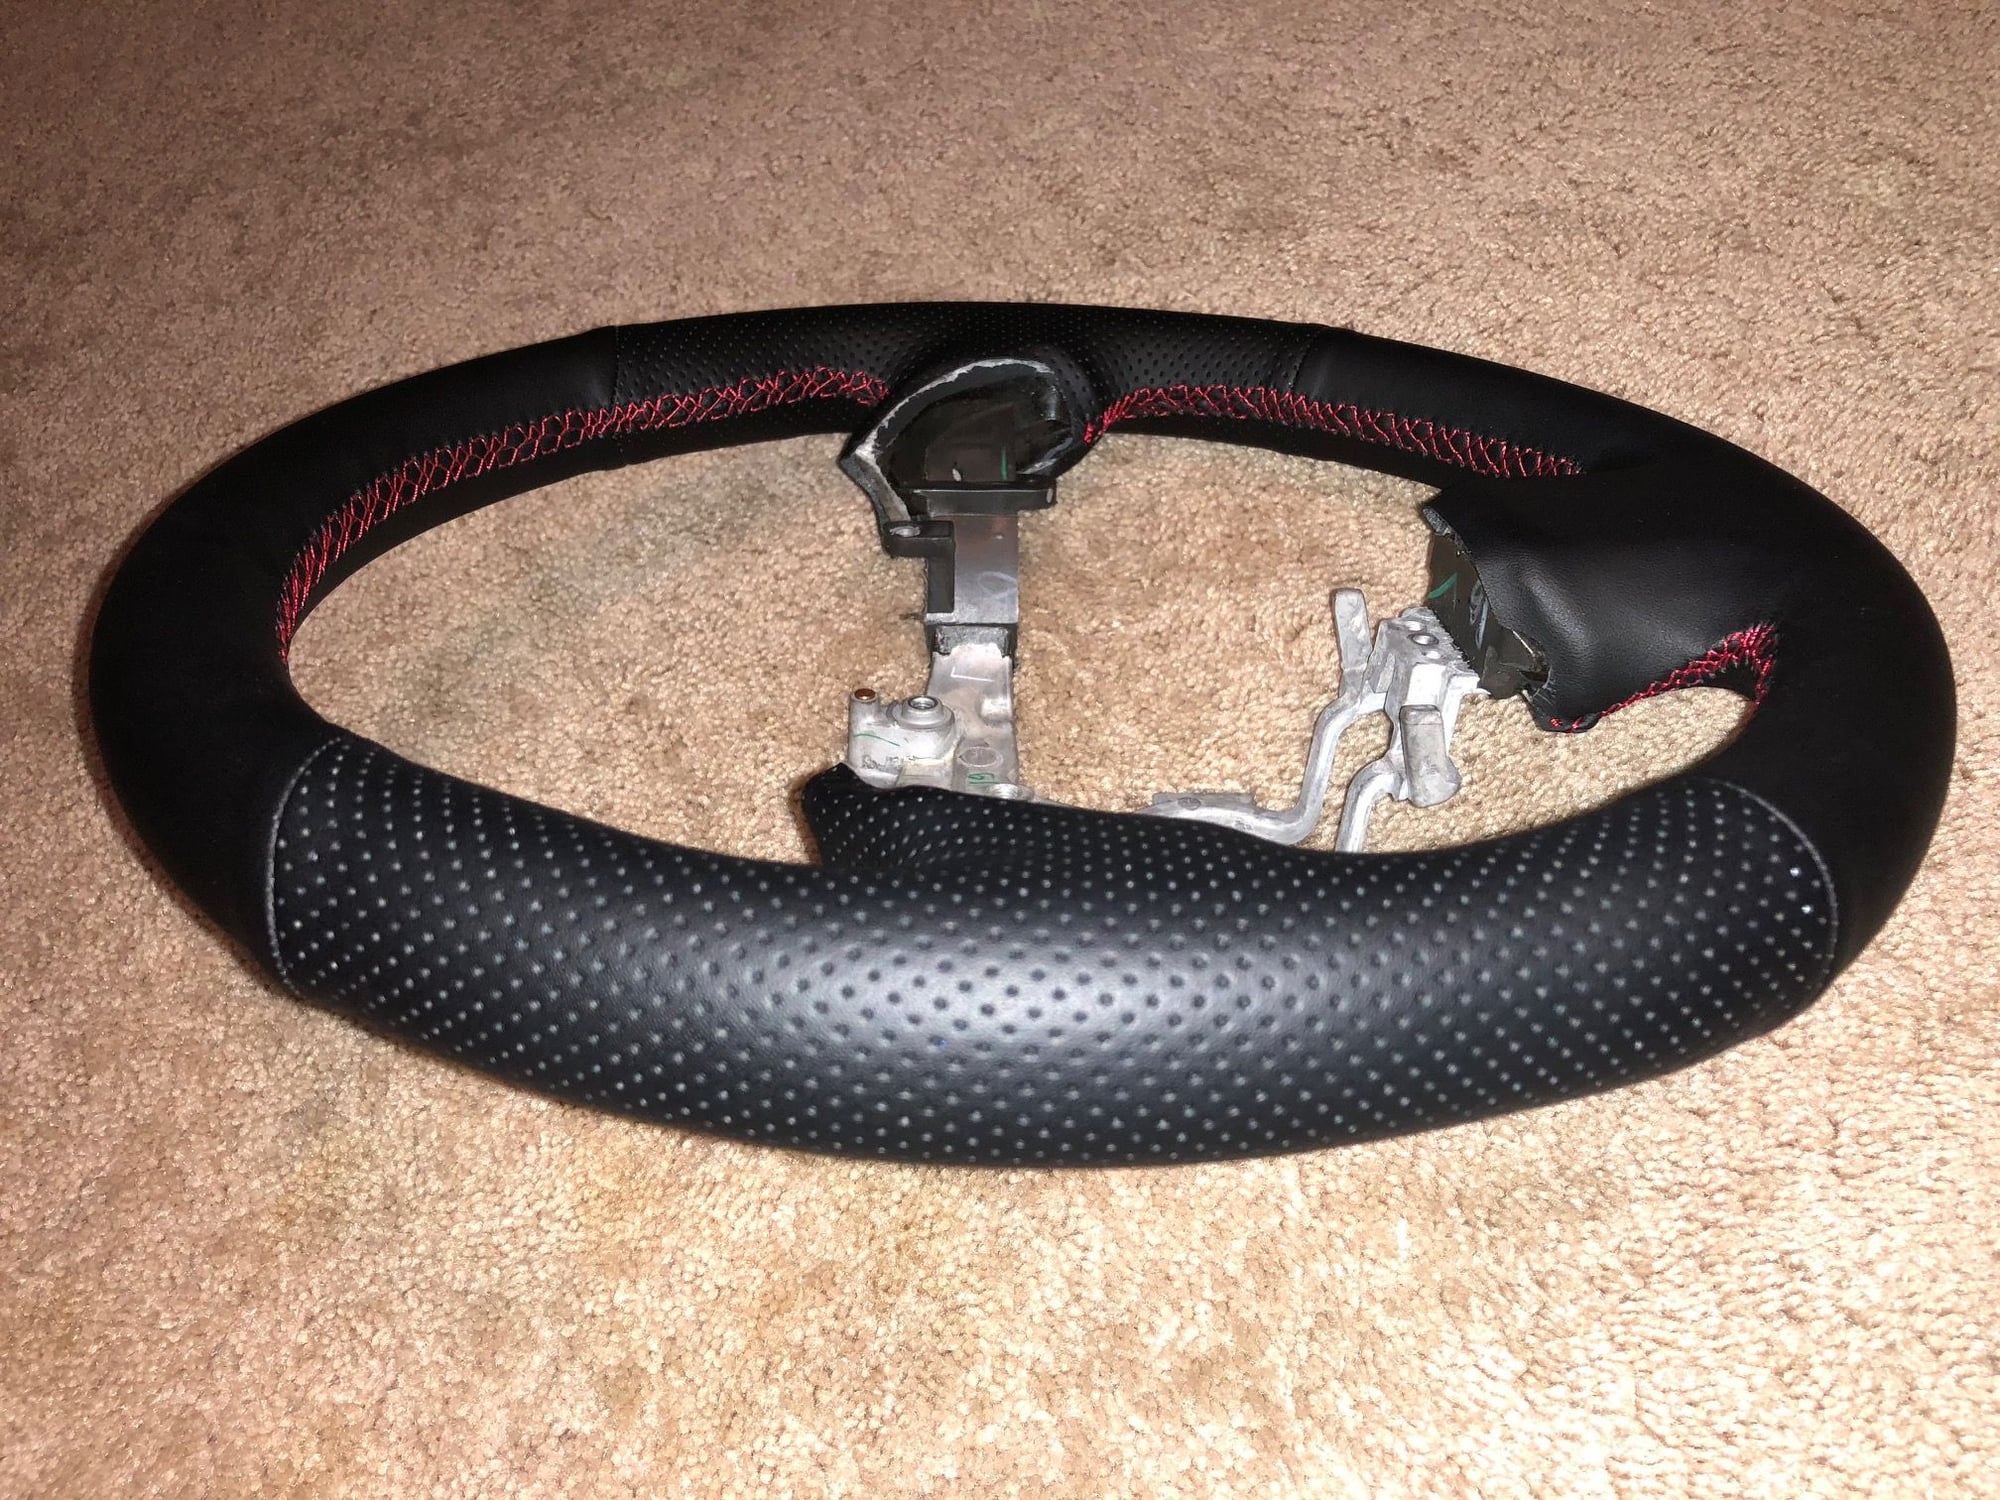 Gallery of Installed Steering Wheels Made by Ryne - Page 3 - MyG37